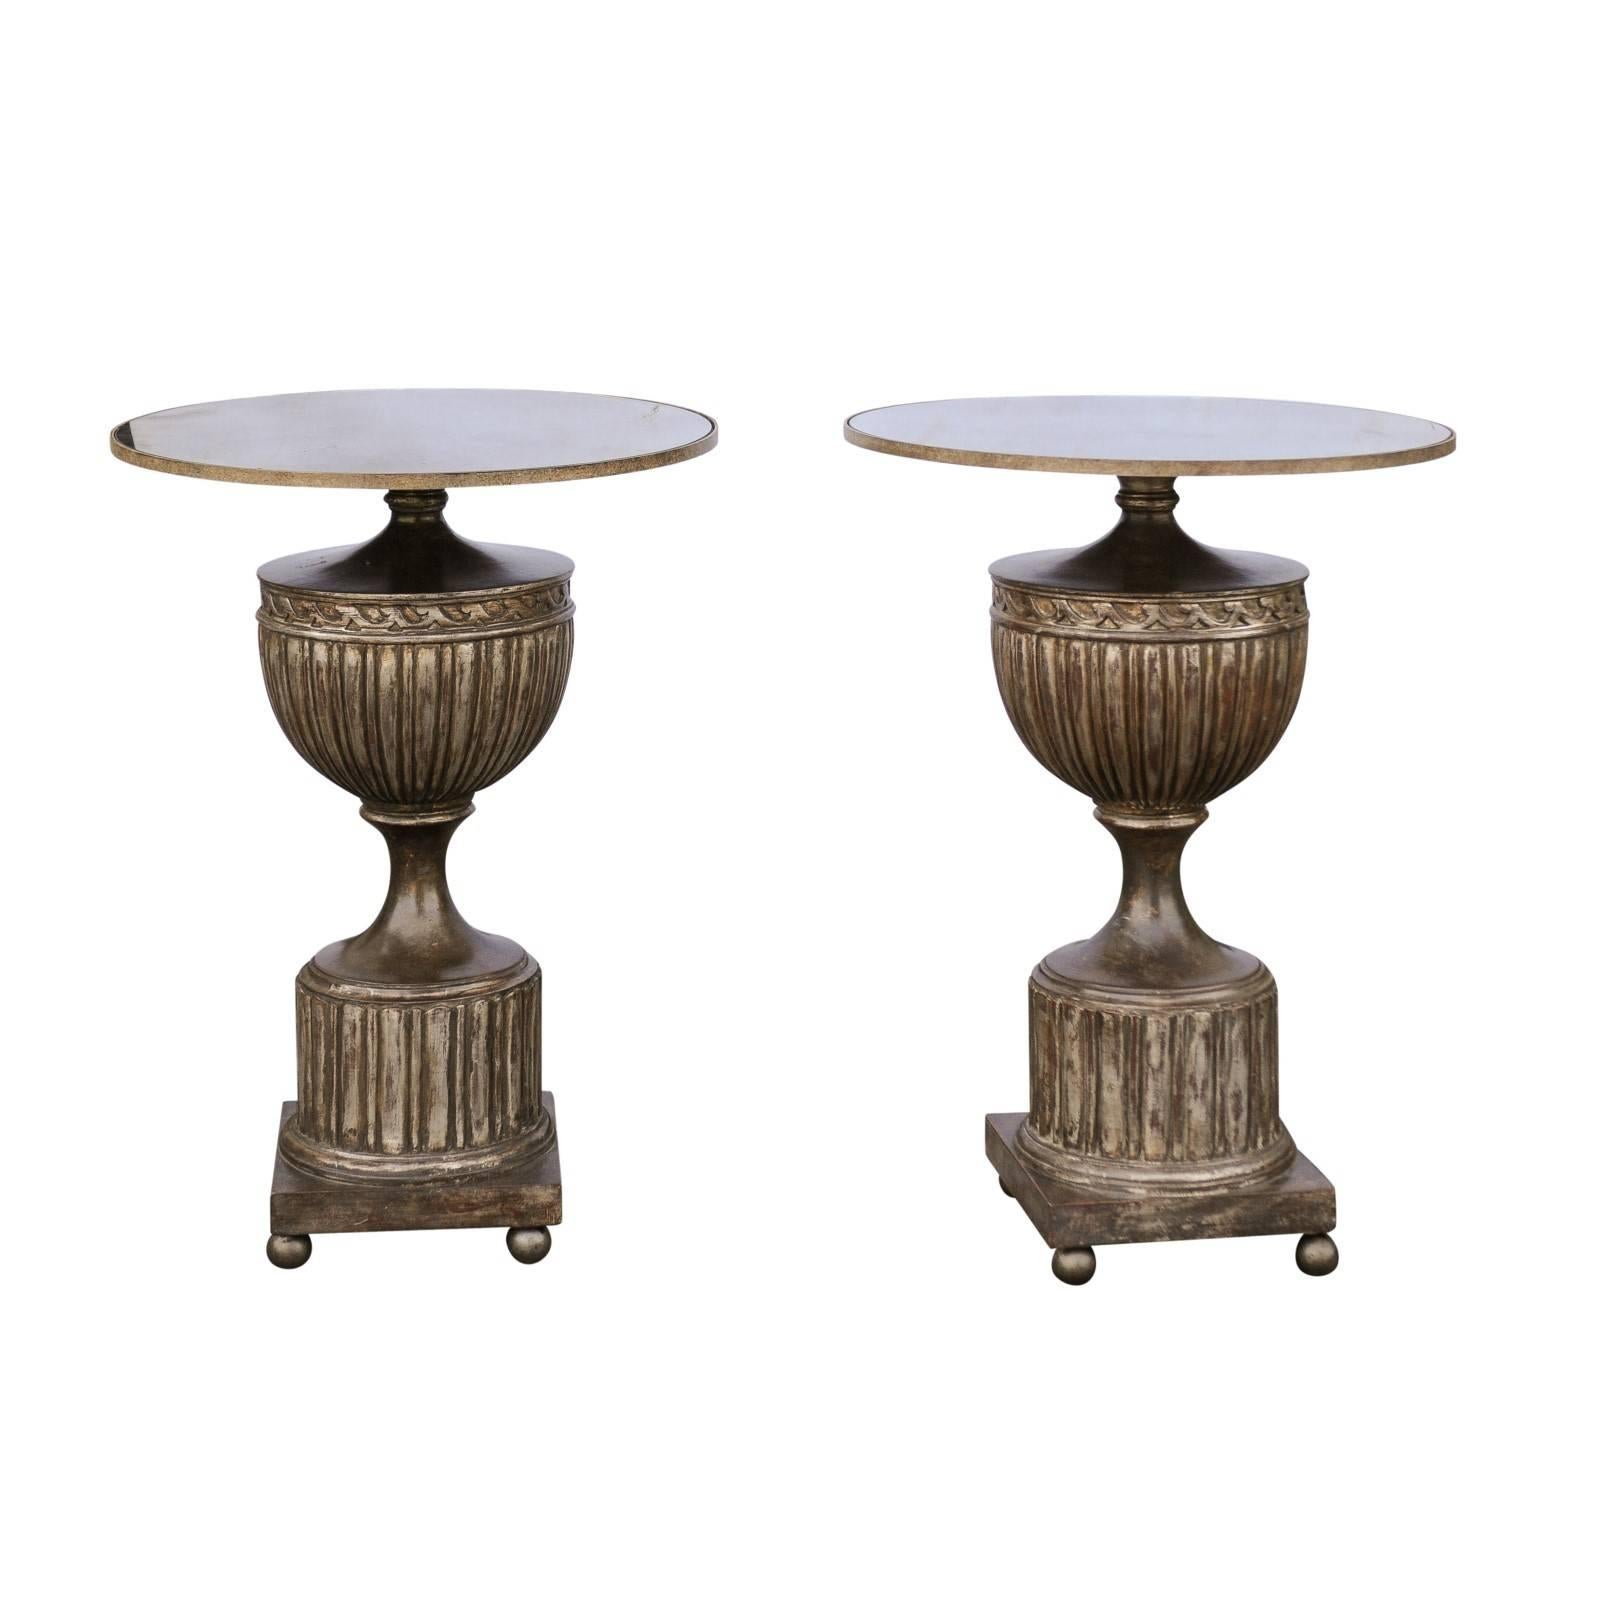 Pair of Italian 1950s Urn Mirrored Top Side Tables with Burnished Silver Finish For Sale